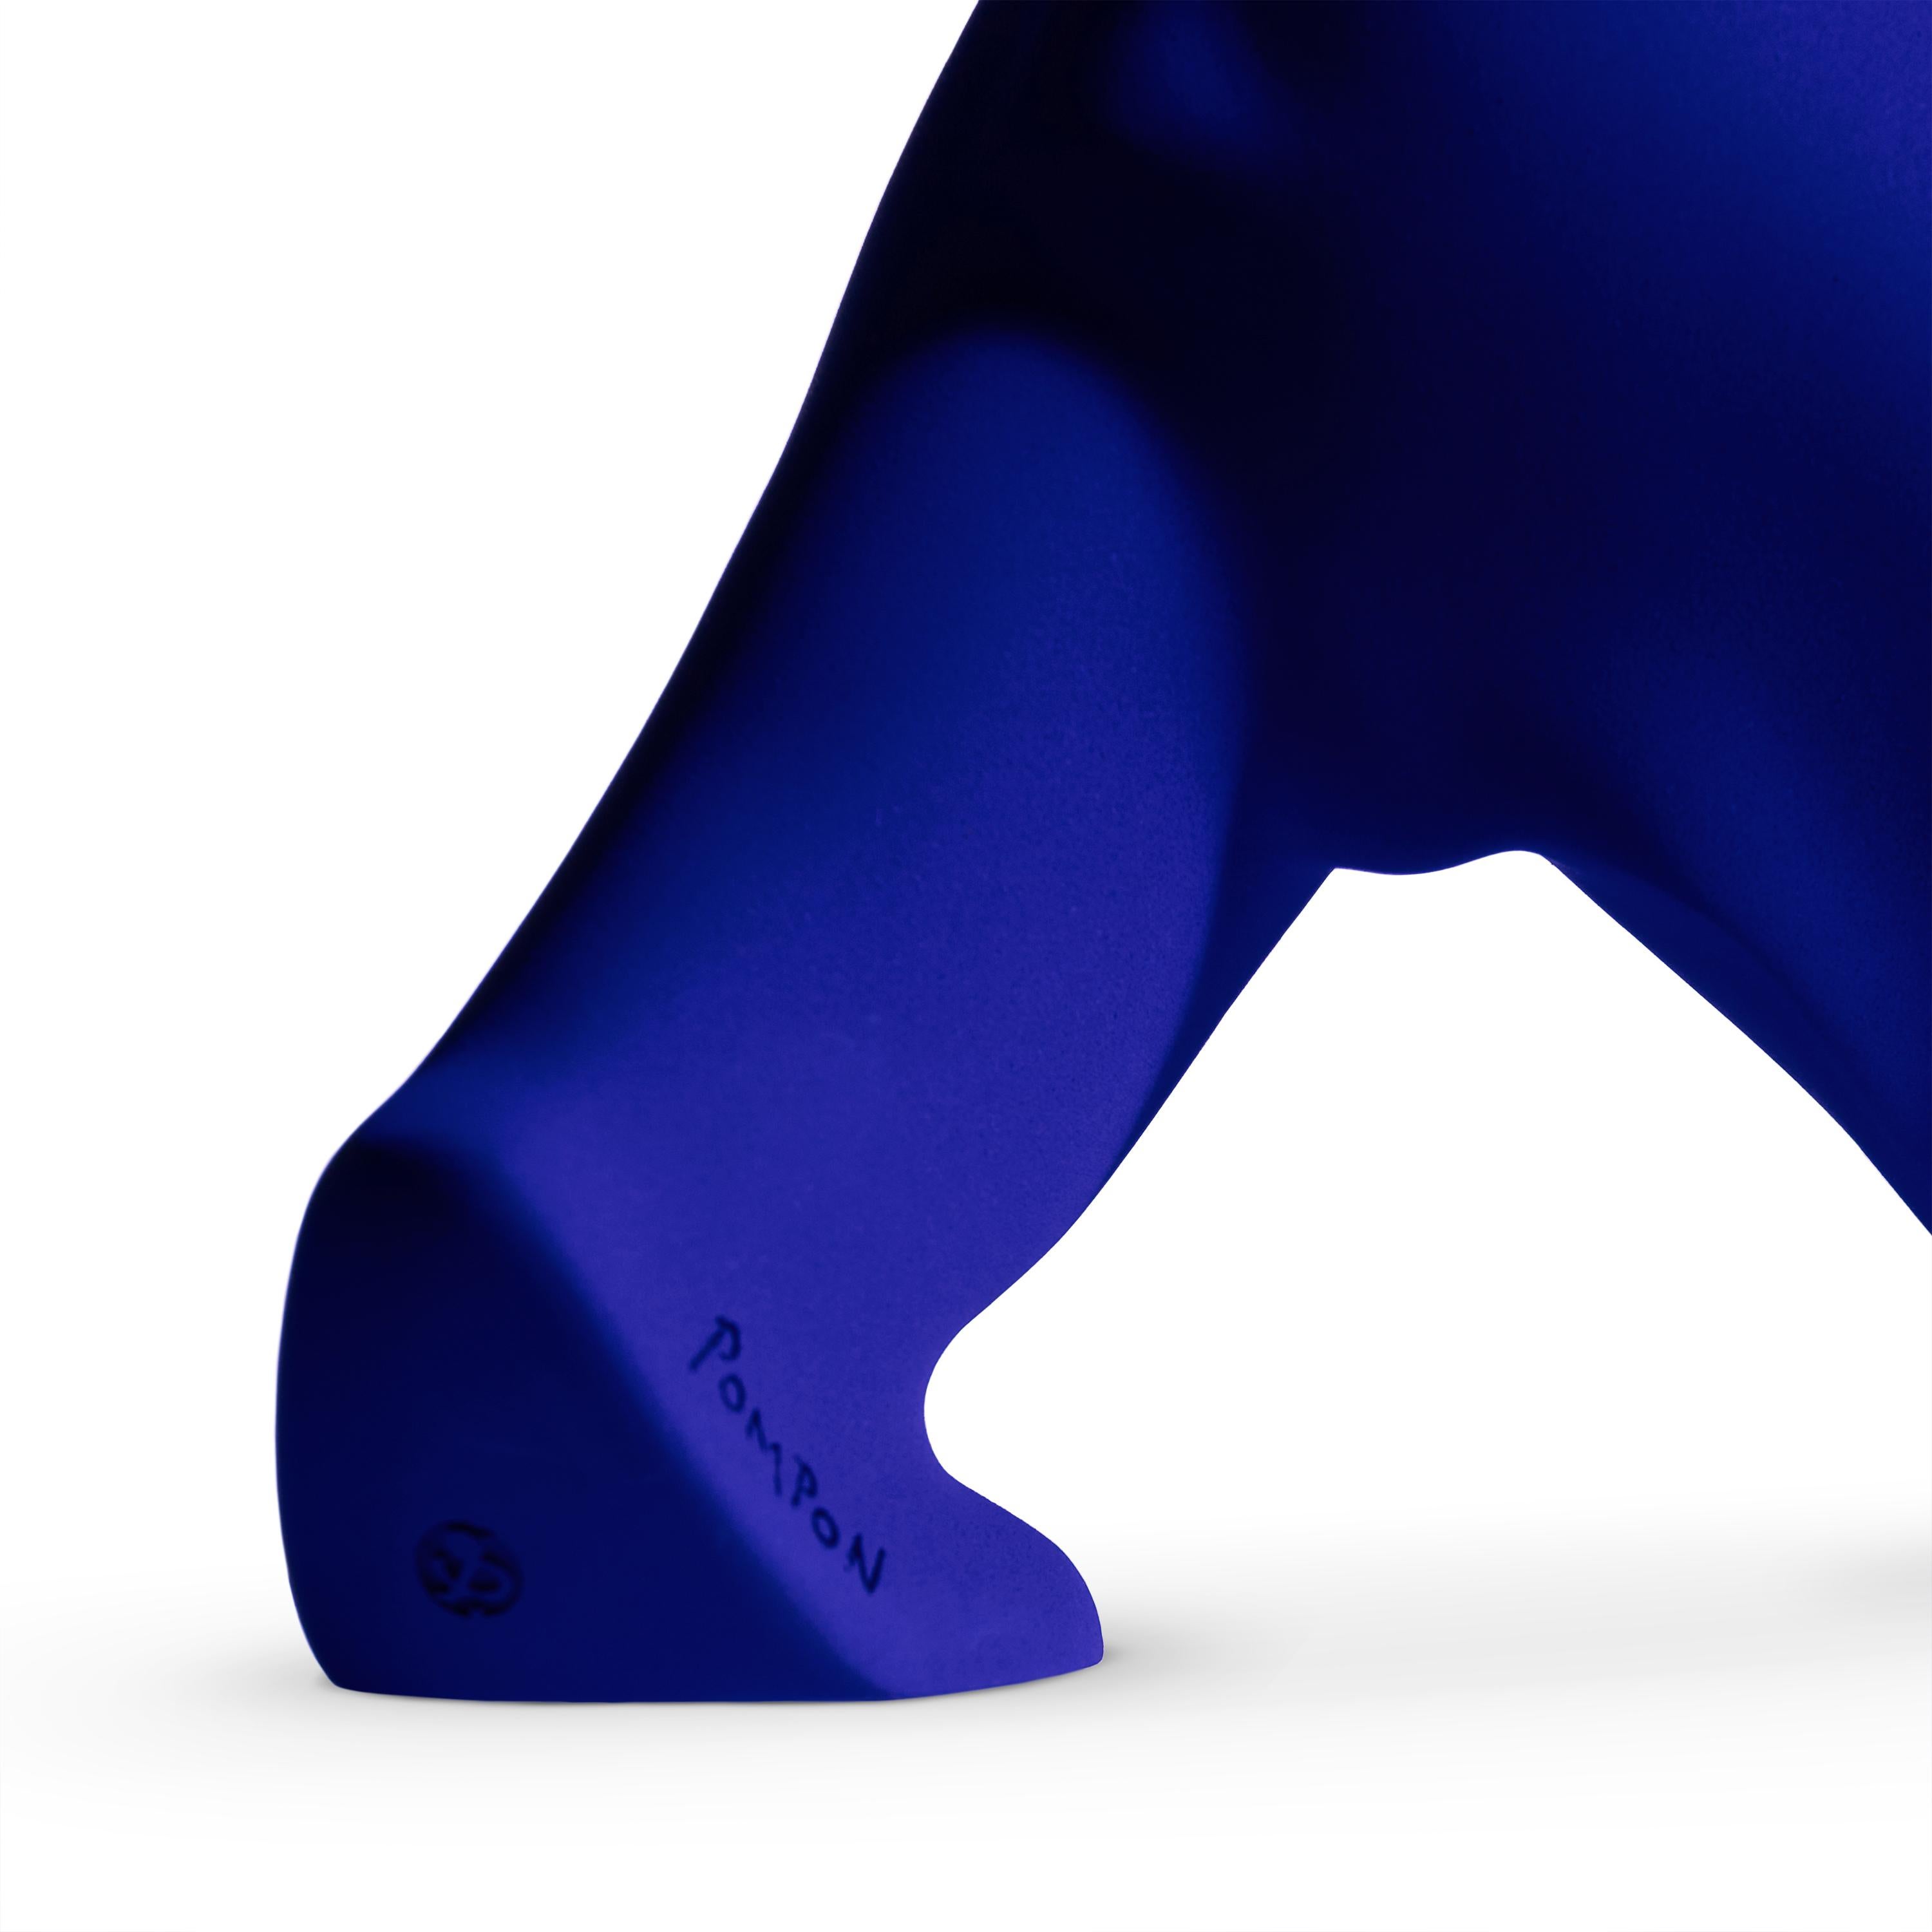 YEAR: 2022
TECHNIQUE: Artisanal resin of 40 cm in length, made after the original mold of the polar bear of François Pompon.
FINITION: Yves Klein blue – IKB
DIMENSIONS: Plexiglas bell size L49 x H27 x W19 cm
WEIGHT: 9,1 kg
DRAWING: Numbered and